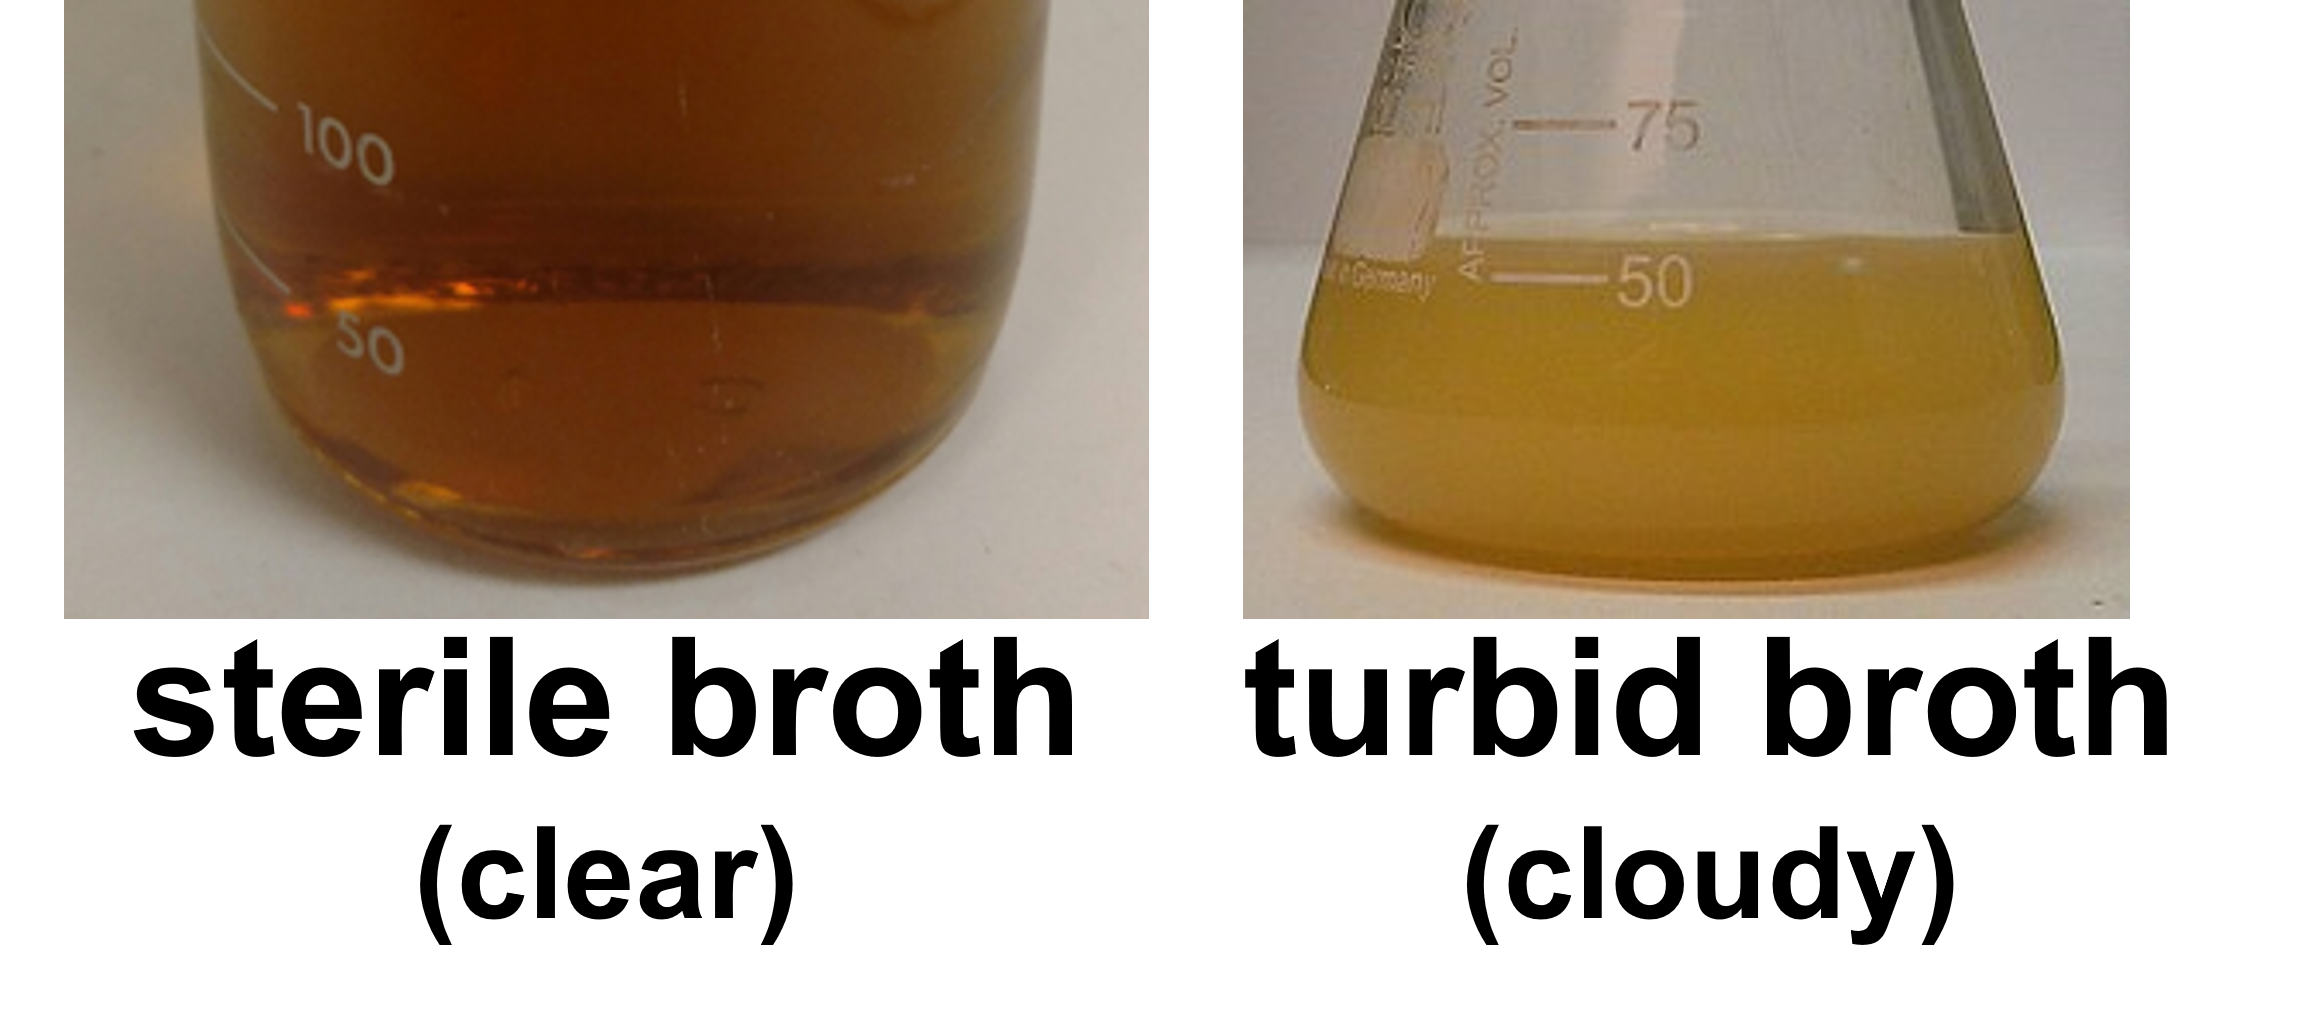 sterile broth is clear and broth that is turbid (cloudy) has growth